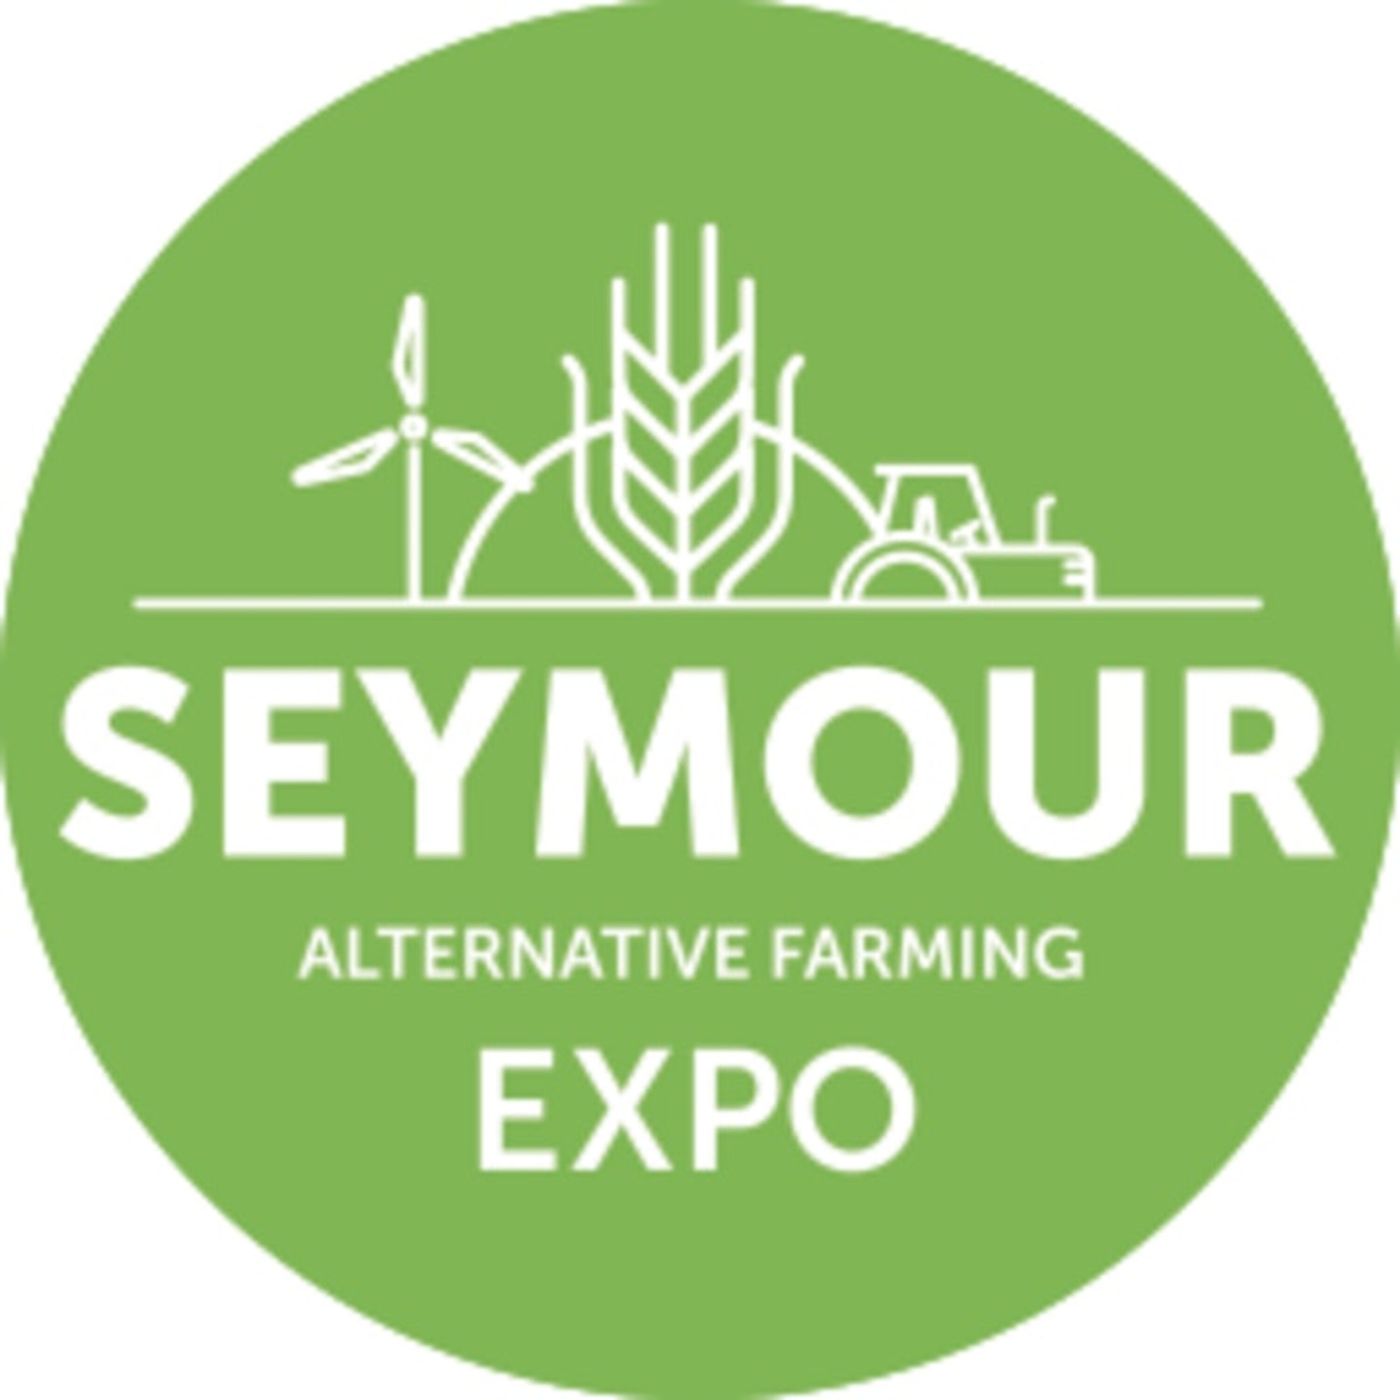 Climate Conversations | Interview: Seymour Alternative Farming Expo; Farmers for Climate Action; climate roadshow